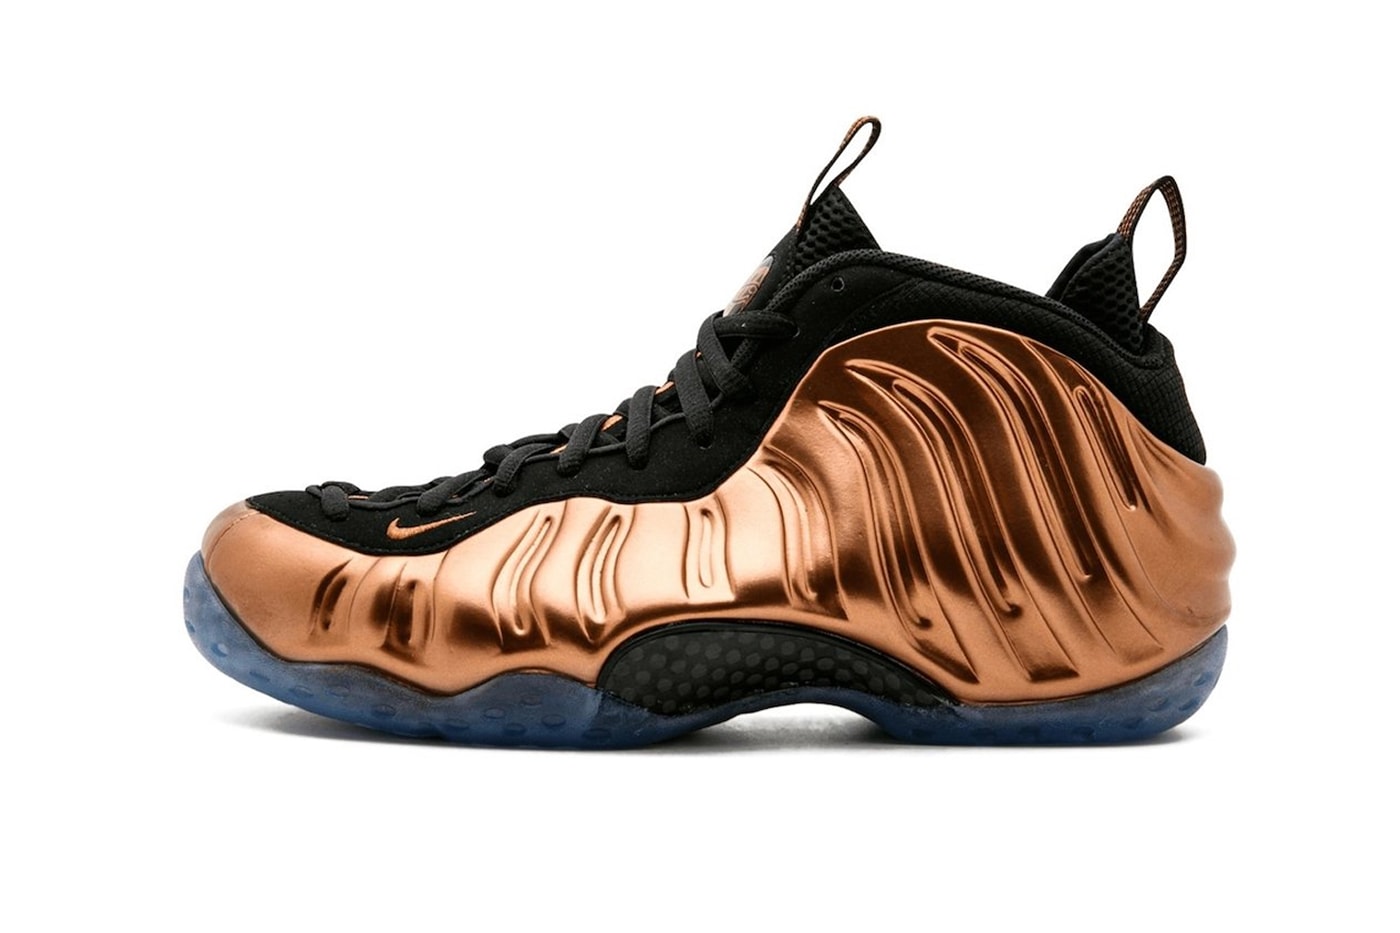 Nike Air Foamposite One "Metallic Copper" Is Set To Return Later This Year FZ9902-001 black metallic copper-off noir